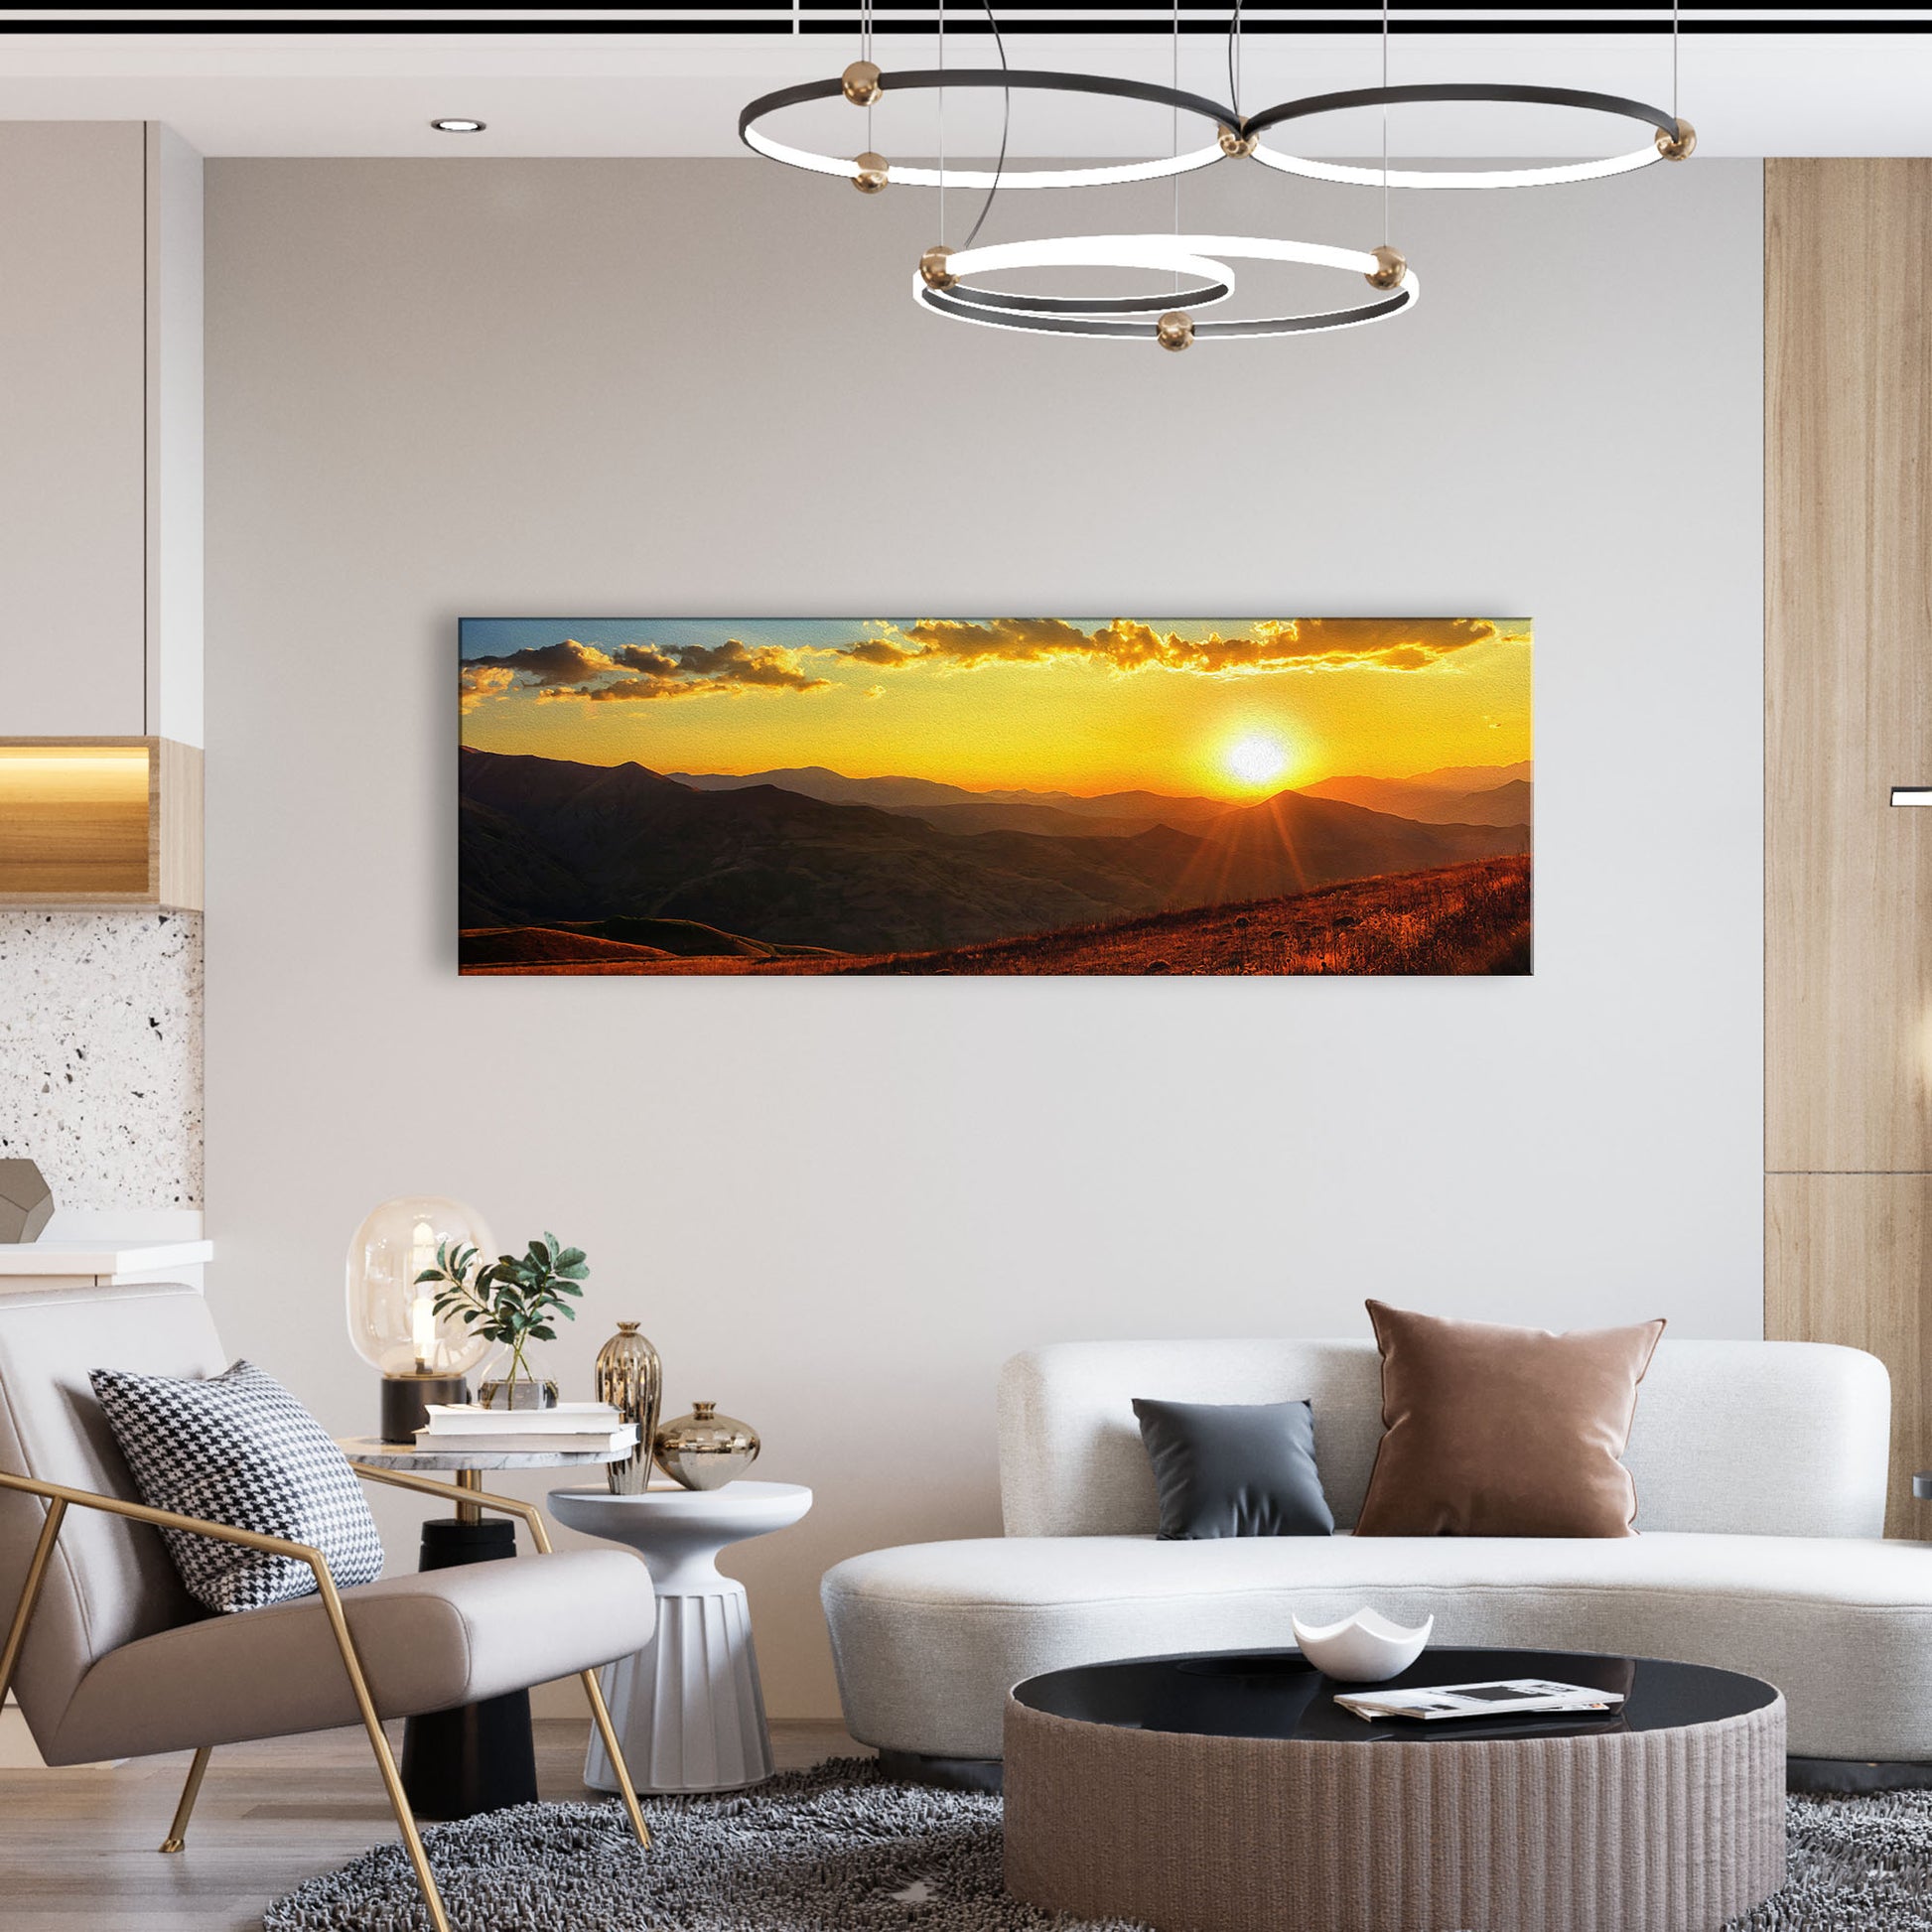 Sunrise And Mountains Canvas Wall Art - Image by Tailored Canvases